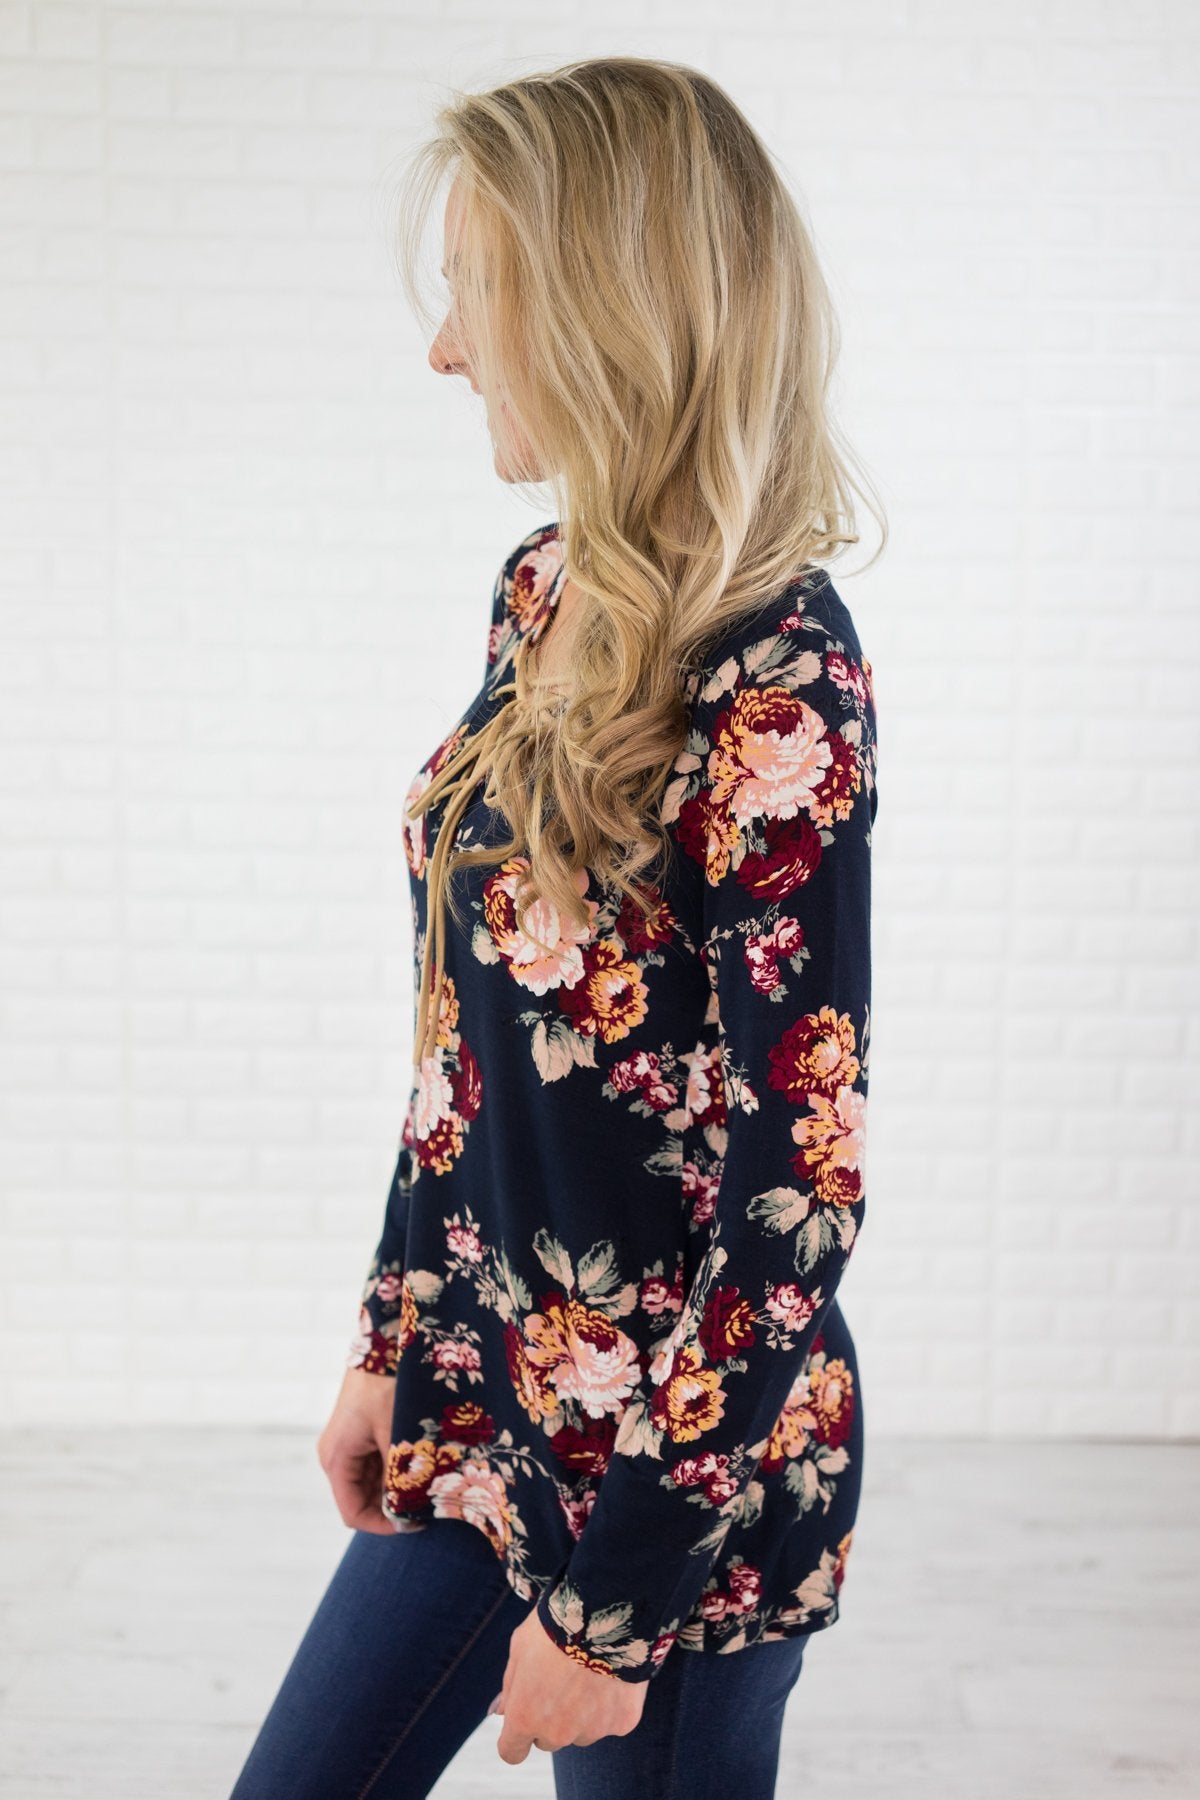 Long Sleeve Navy Floral Lace Up Top